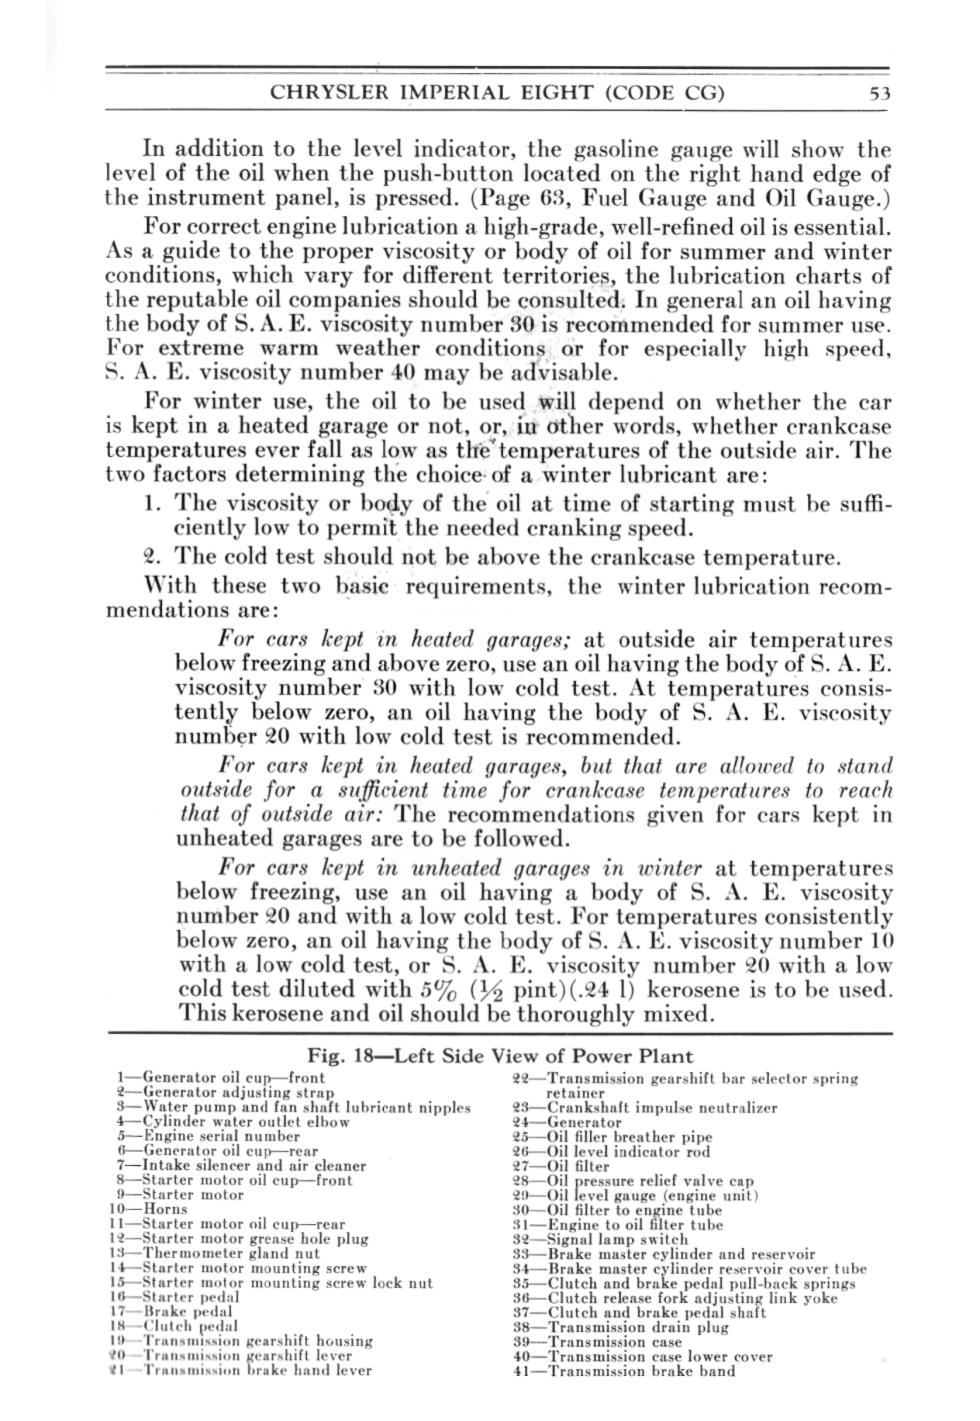 1931 Chrysler Imperial Owners Manual Page 53